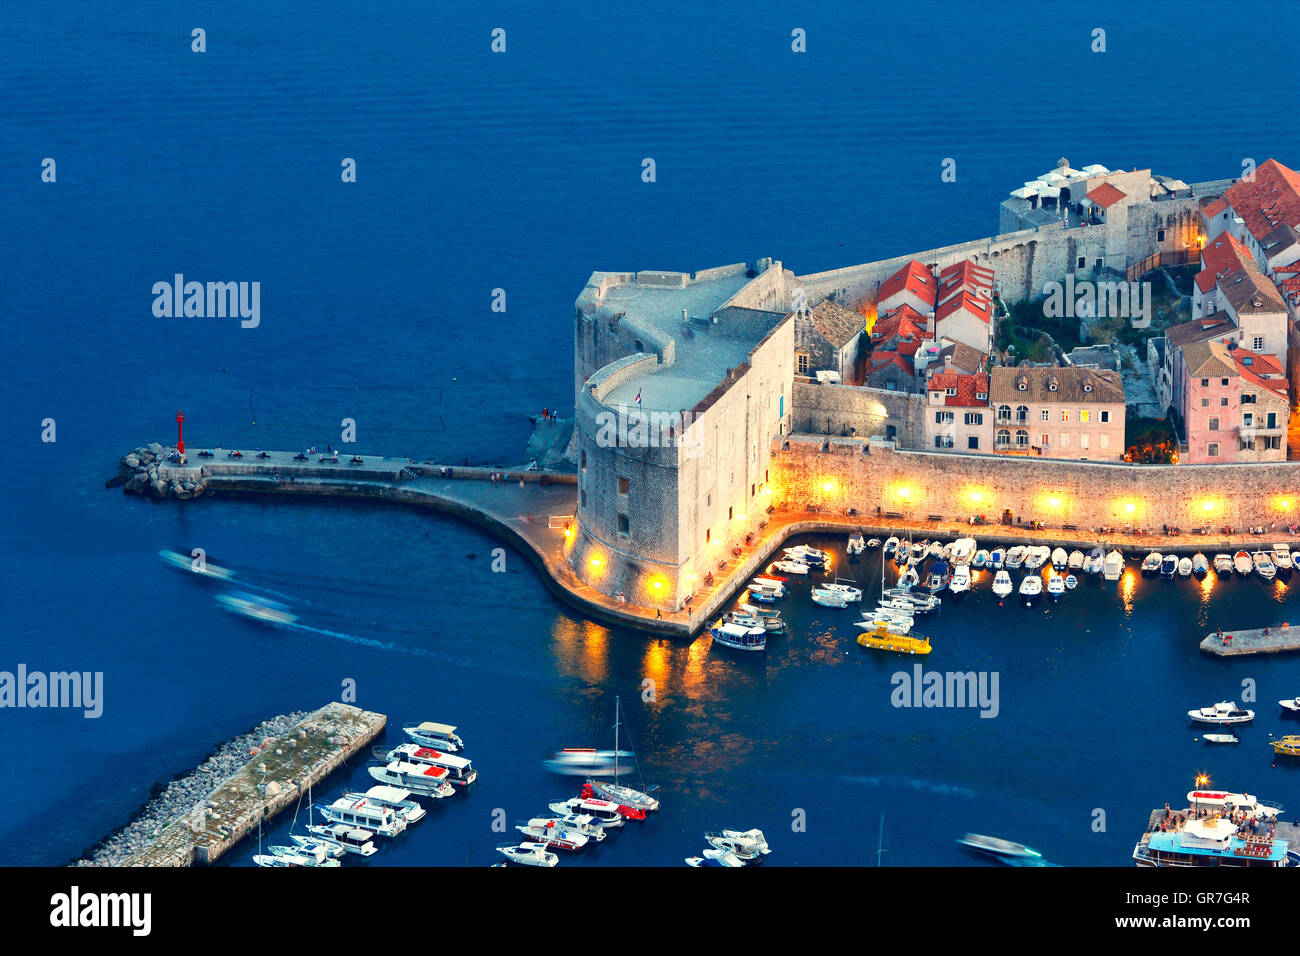 Dubrovnik city walls at night from above Stock Photo